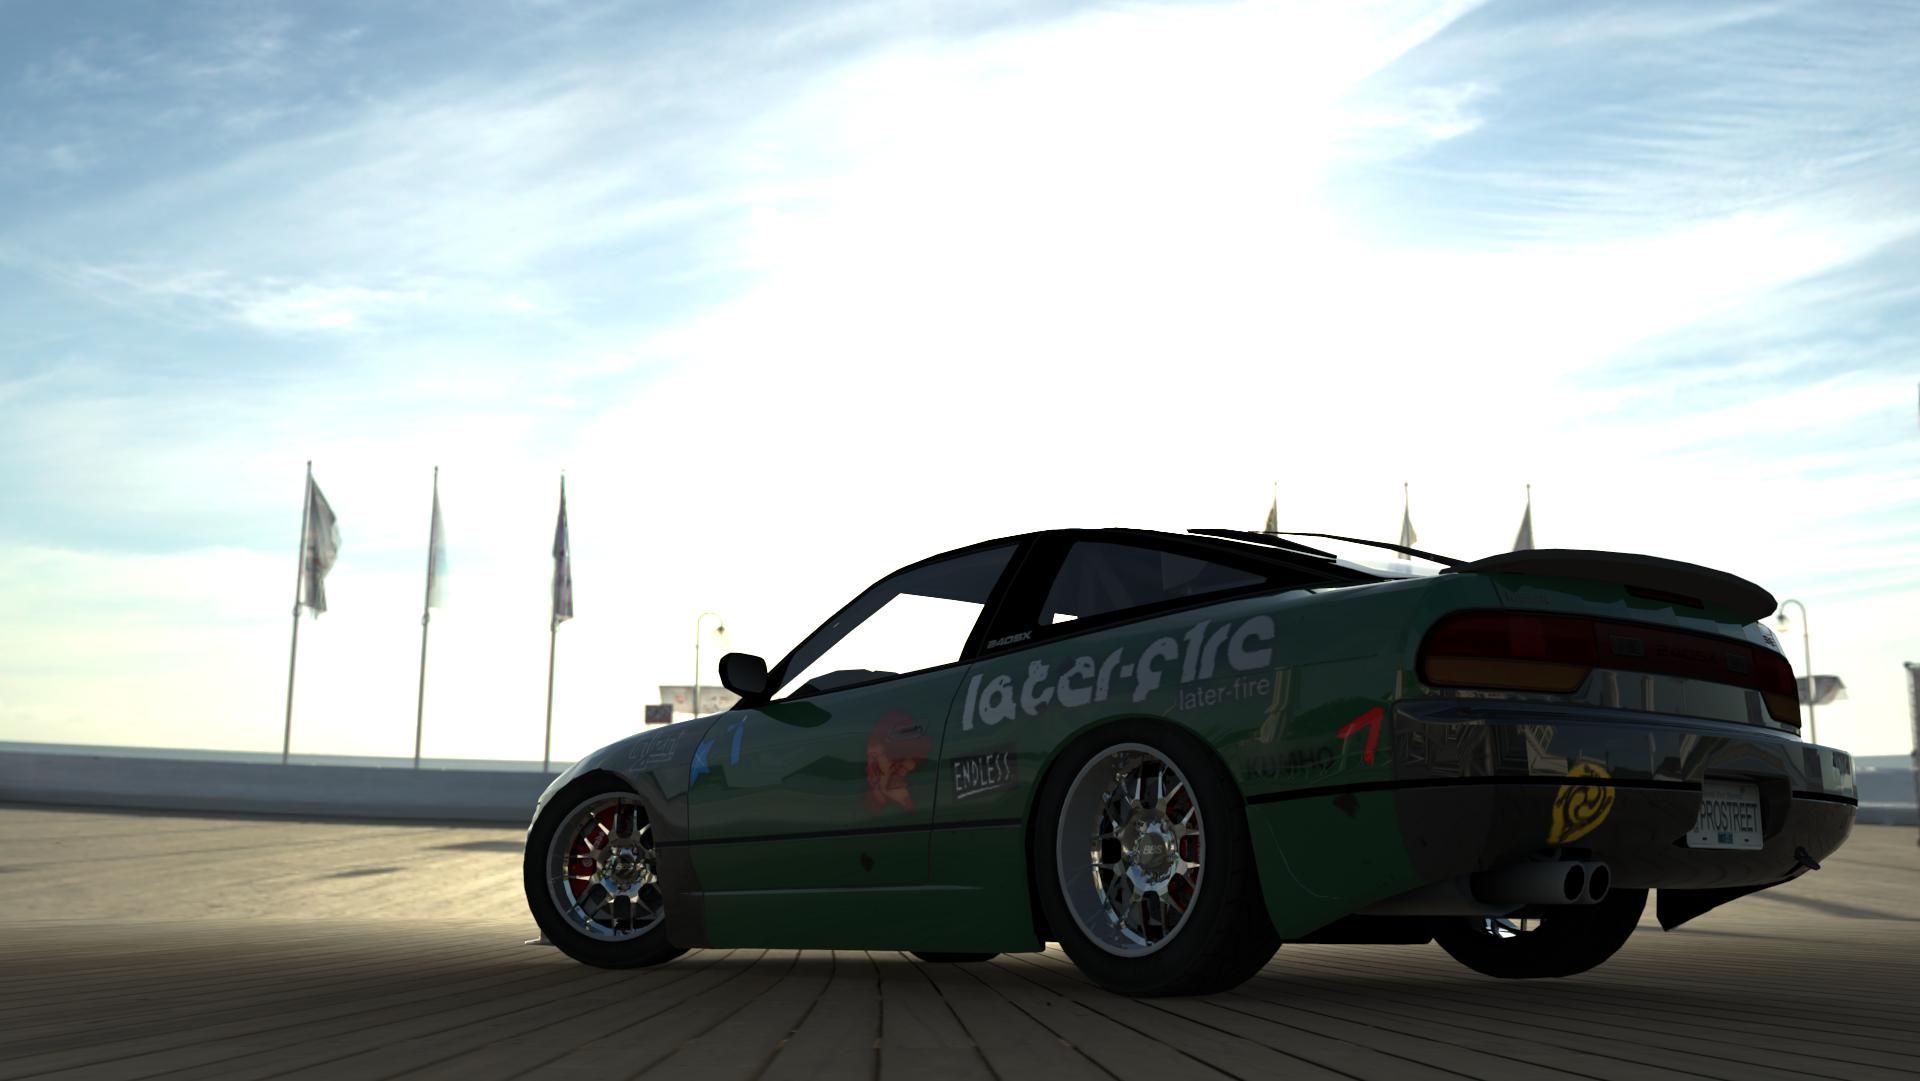 General 1920x1081 Nissan 240SX Ryan Cooper Need for Speed: ProStreet Nissan Japanese cars video games